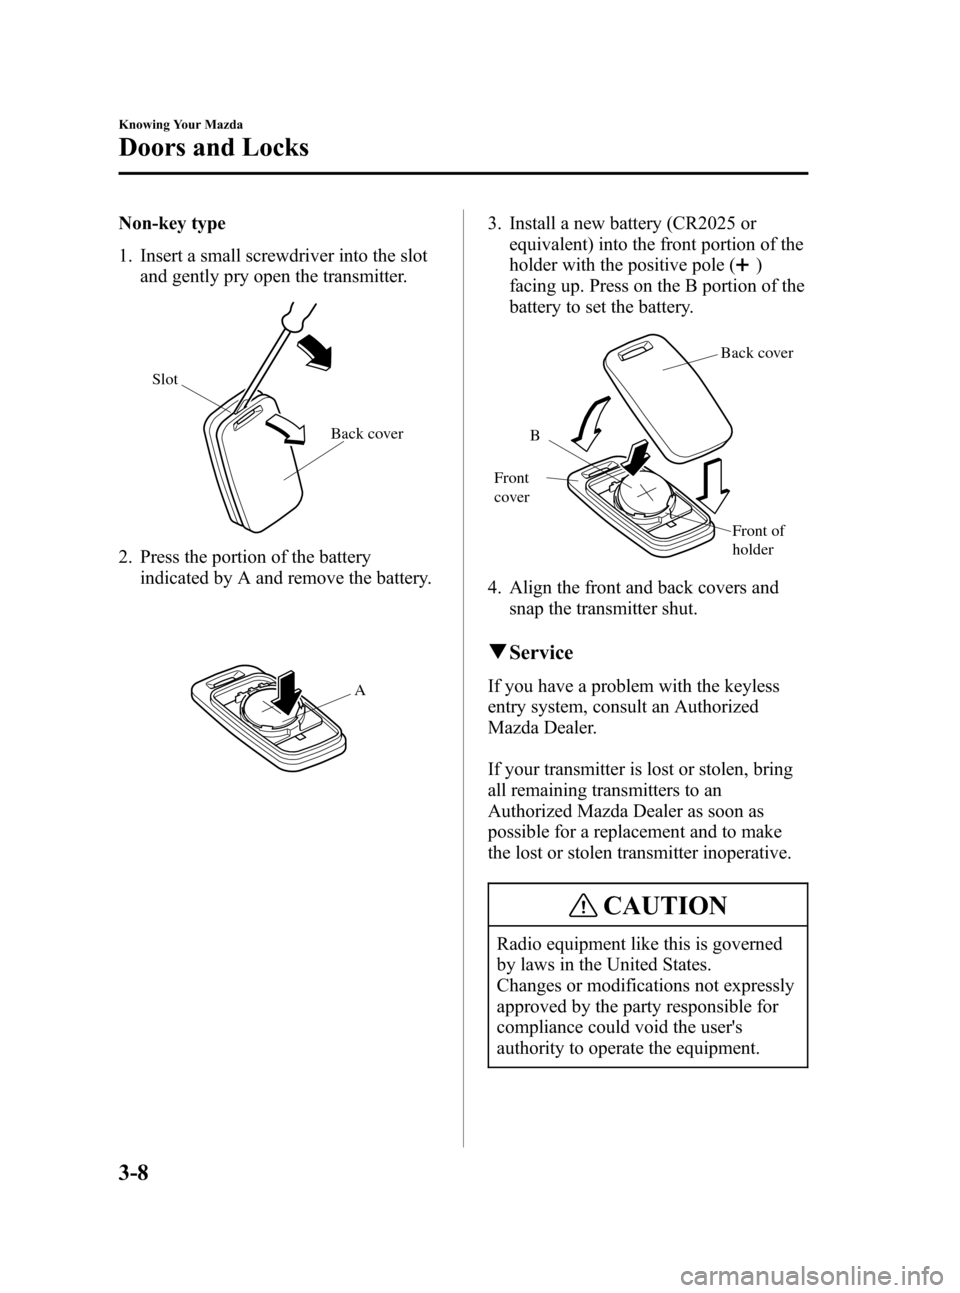 MAZDA MODEL 3 HATCHBACK 2007   (in English) User Guide Black plate (82,1)
Non-key type
1. Insert a small screwdriver into the slot
and gently pry open the transmitter.
Back cover Slot
2. Press the portion of the battery
indicated by A and remove the batte